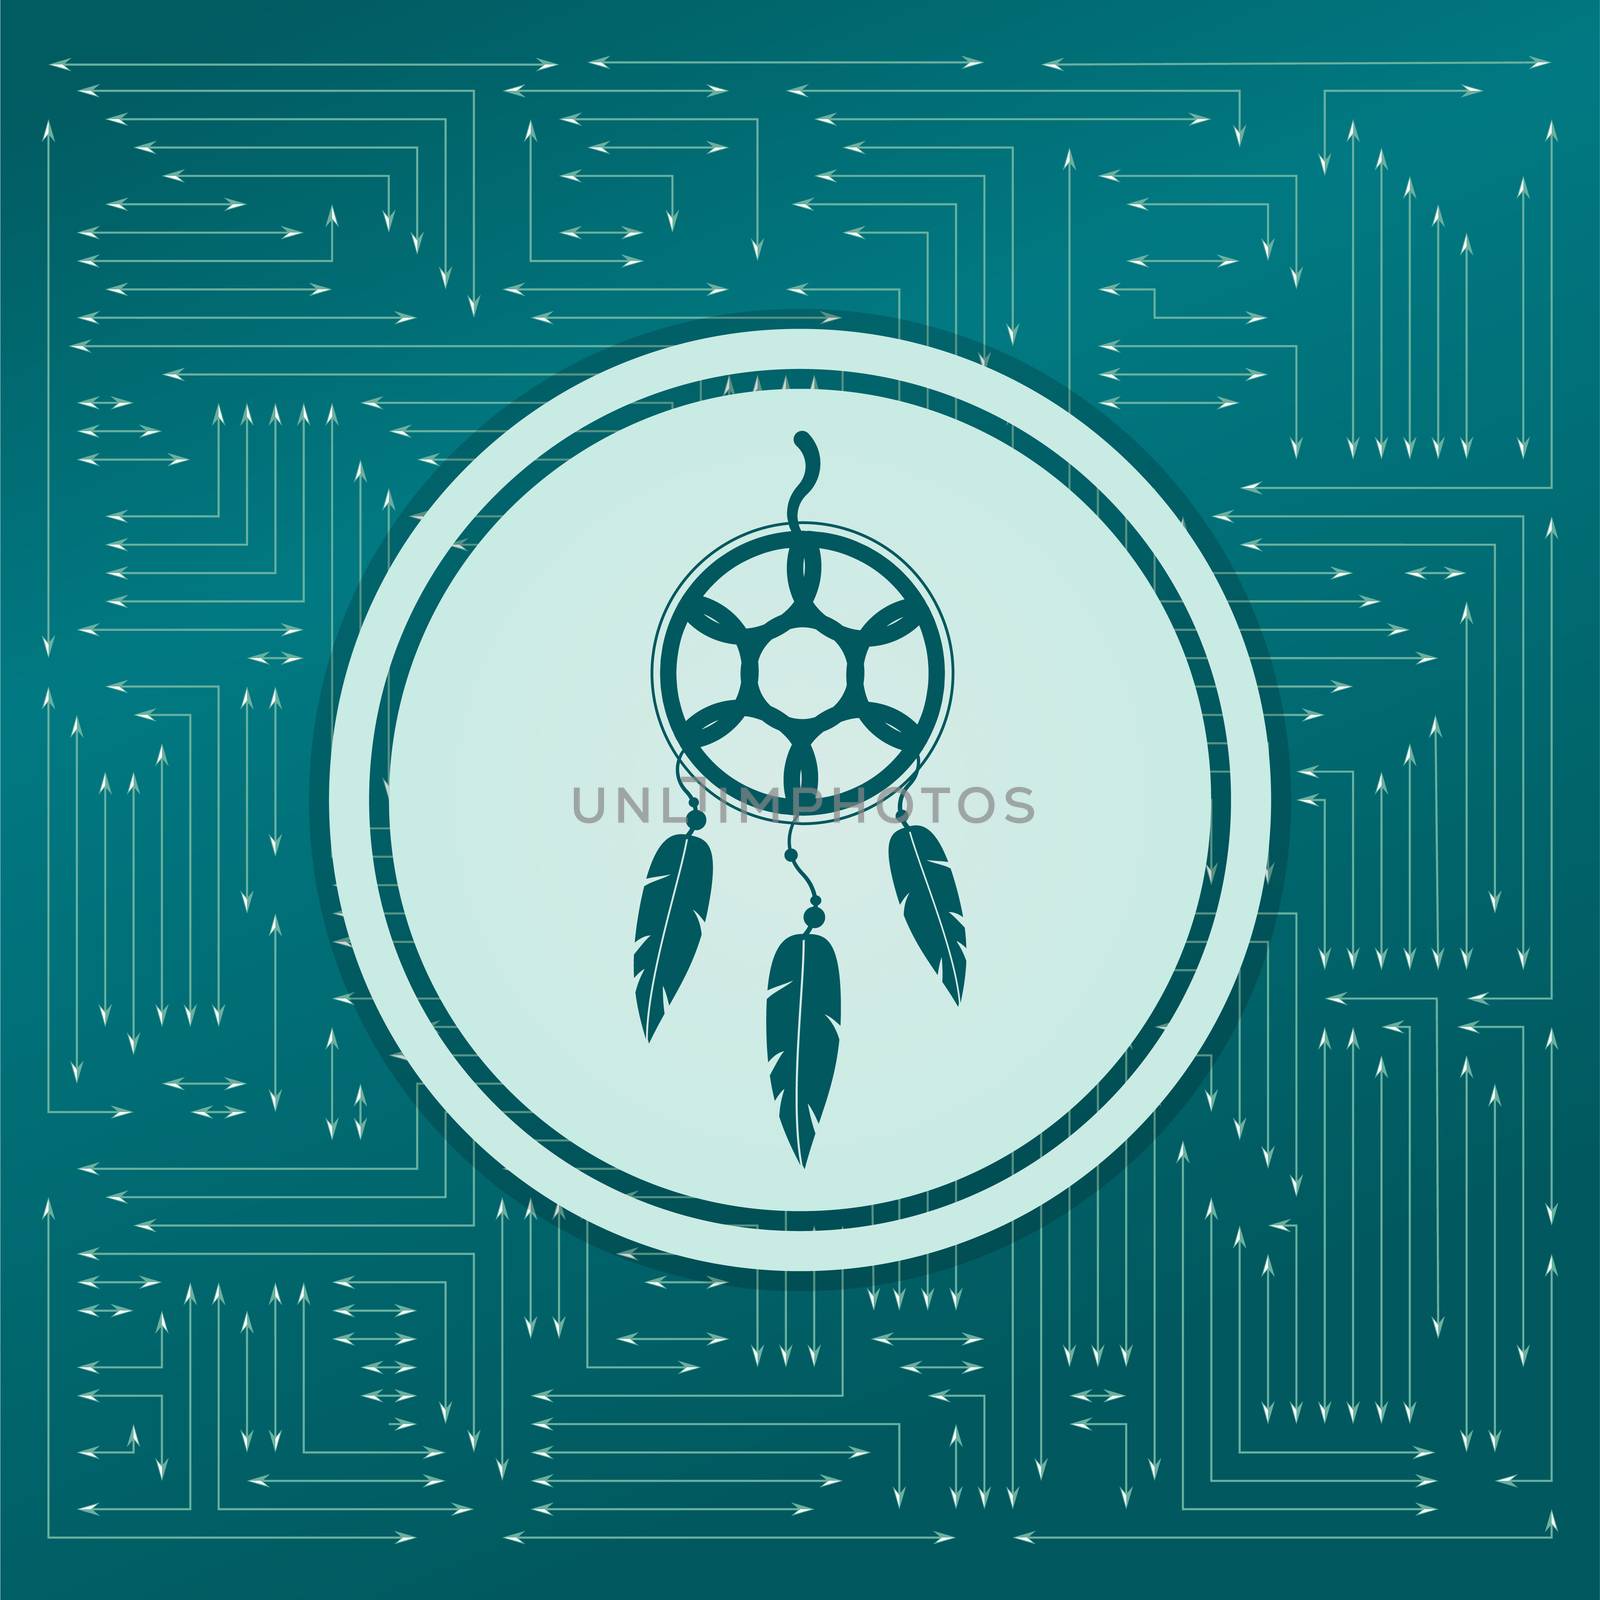 Dreamcatcher icon on a green background, with arrows in different directions. It appears on the electronic board.  by Adamchuk